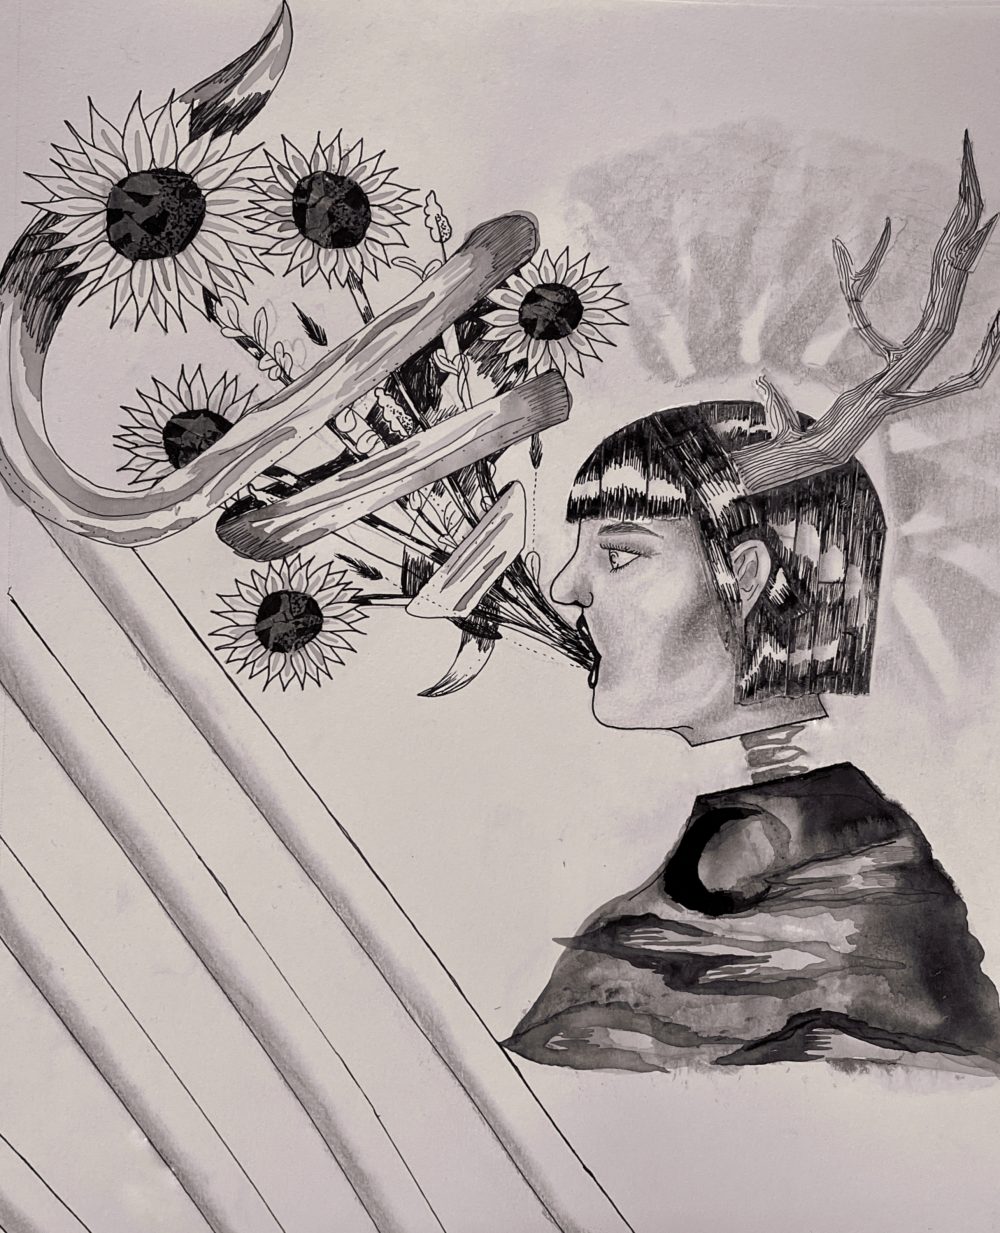 A drawing in black and white of a woman with antlers. She has flowers coming out of an open mouth that reach towards the sky. She has a slight halo around her. She has no neck. In its stead, attaching to her head is simply her vertebrae which travels down her spine and is then cut off by solid black sky. A ribbon wraps around the flowers from her mouth.